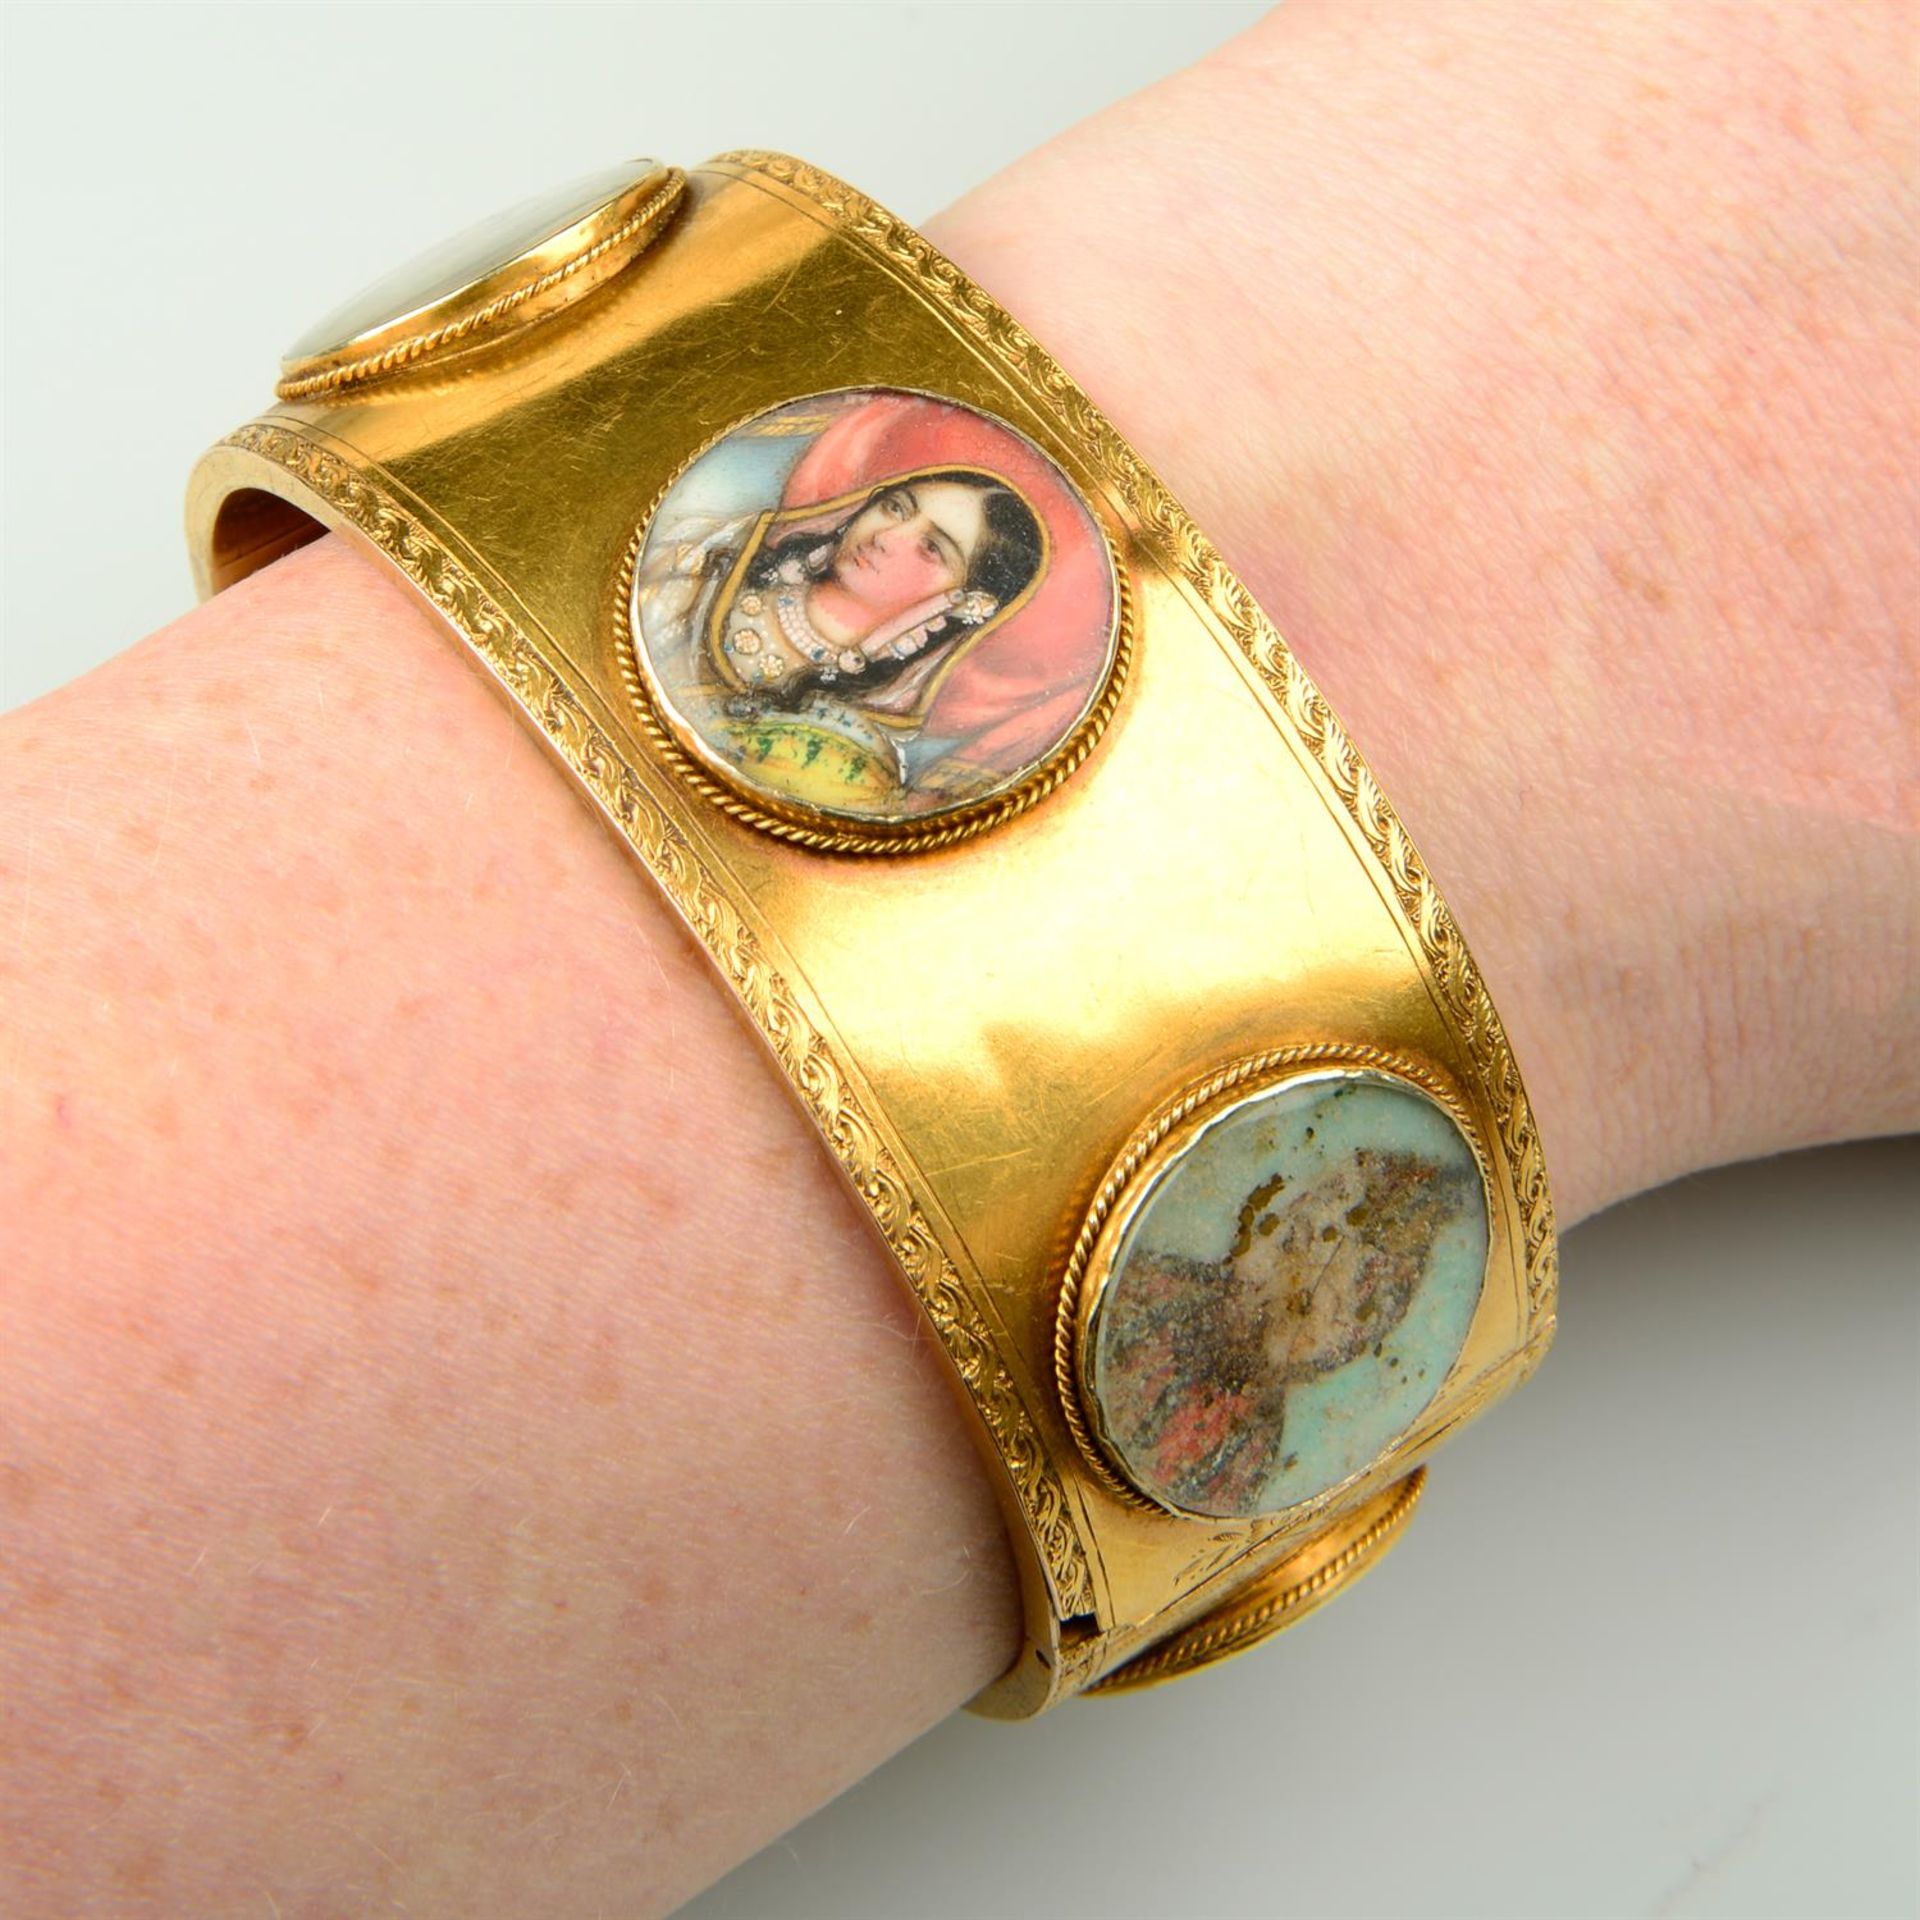 A mid 19th century gold hinged bangle, set with six Mughal portrait miniature glazed panels and